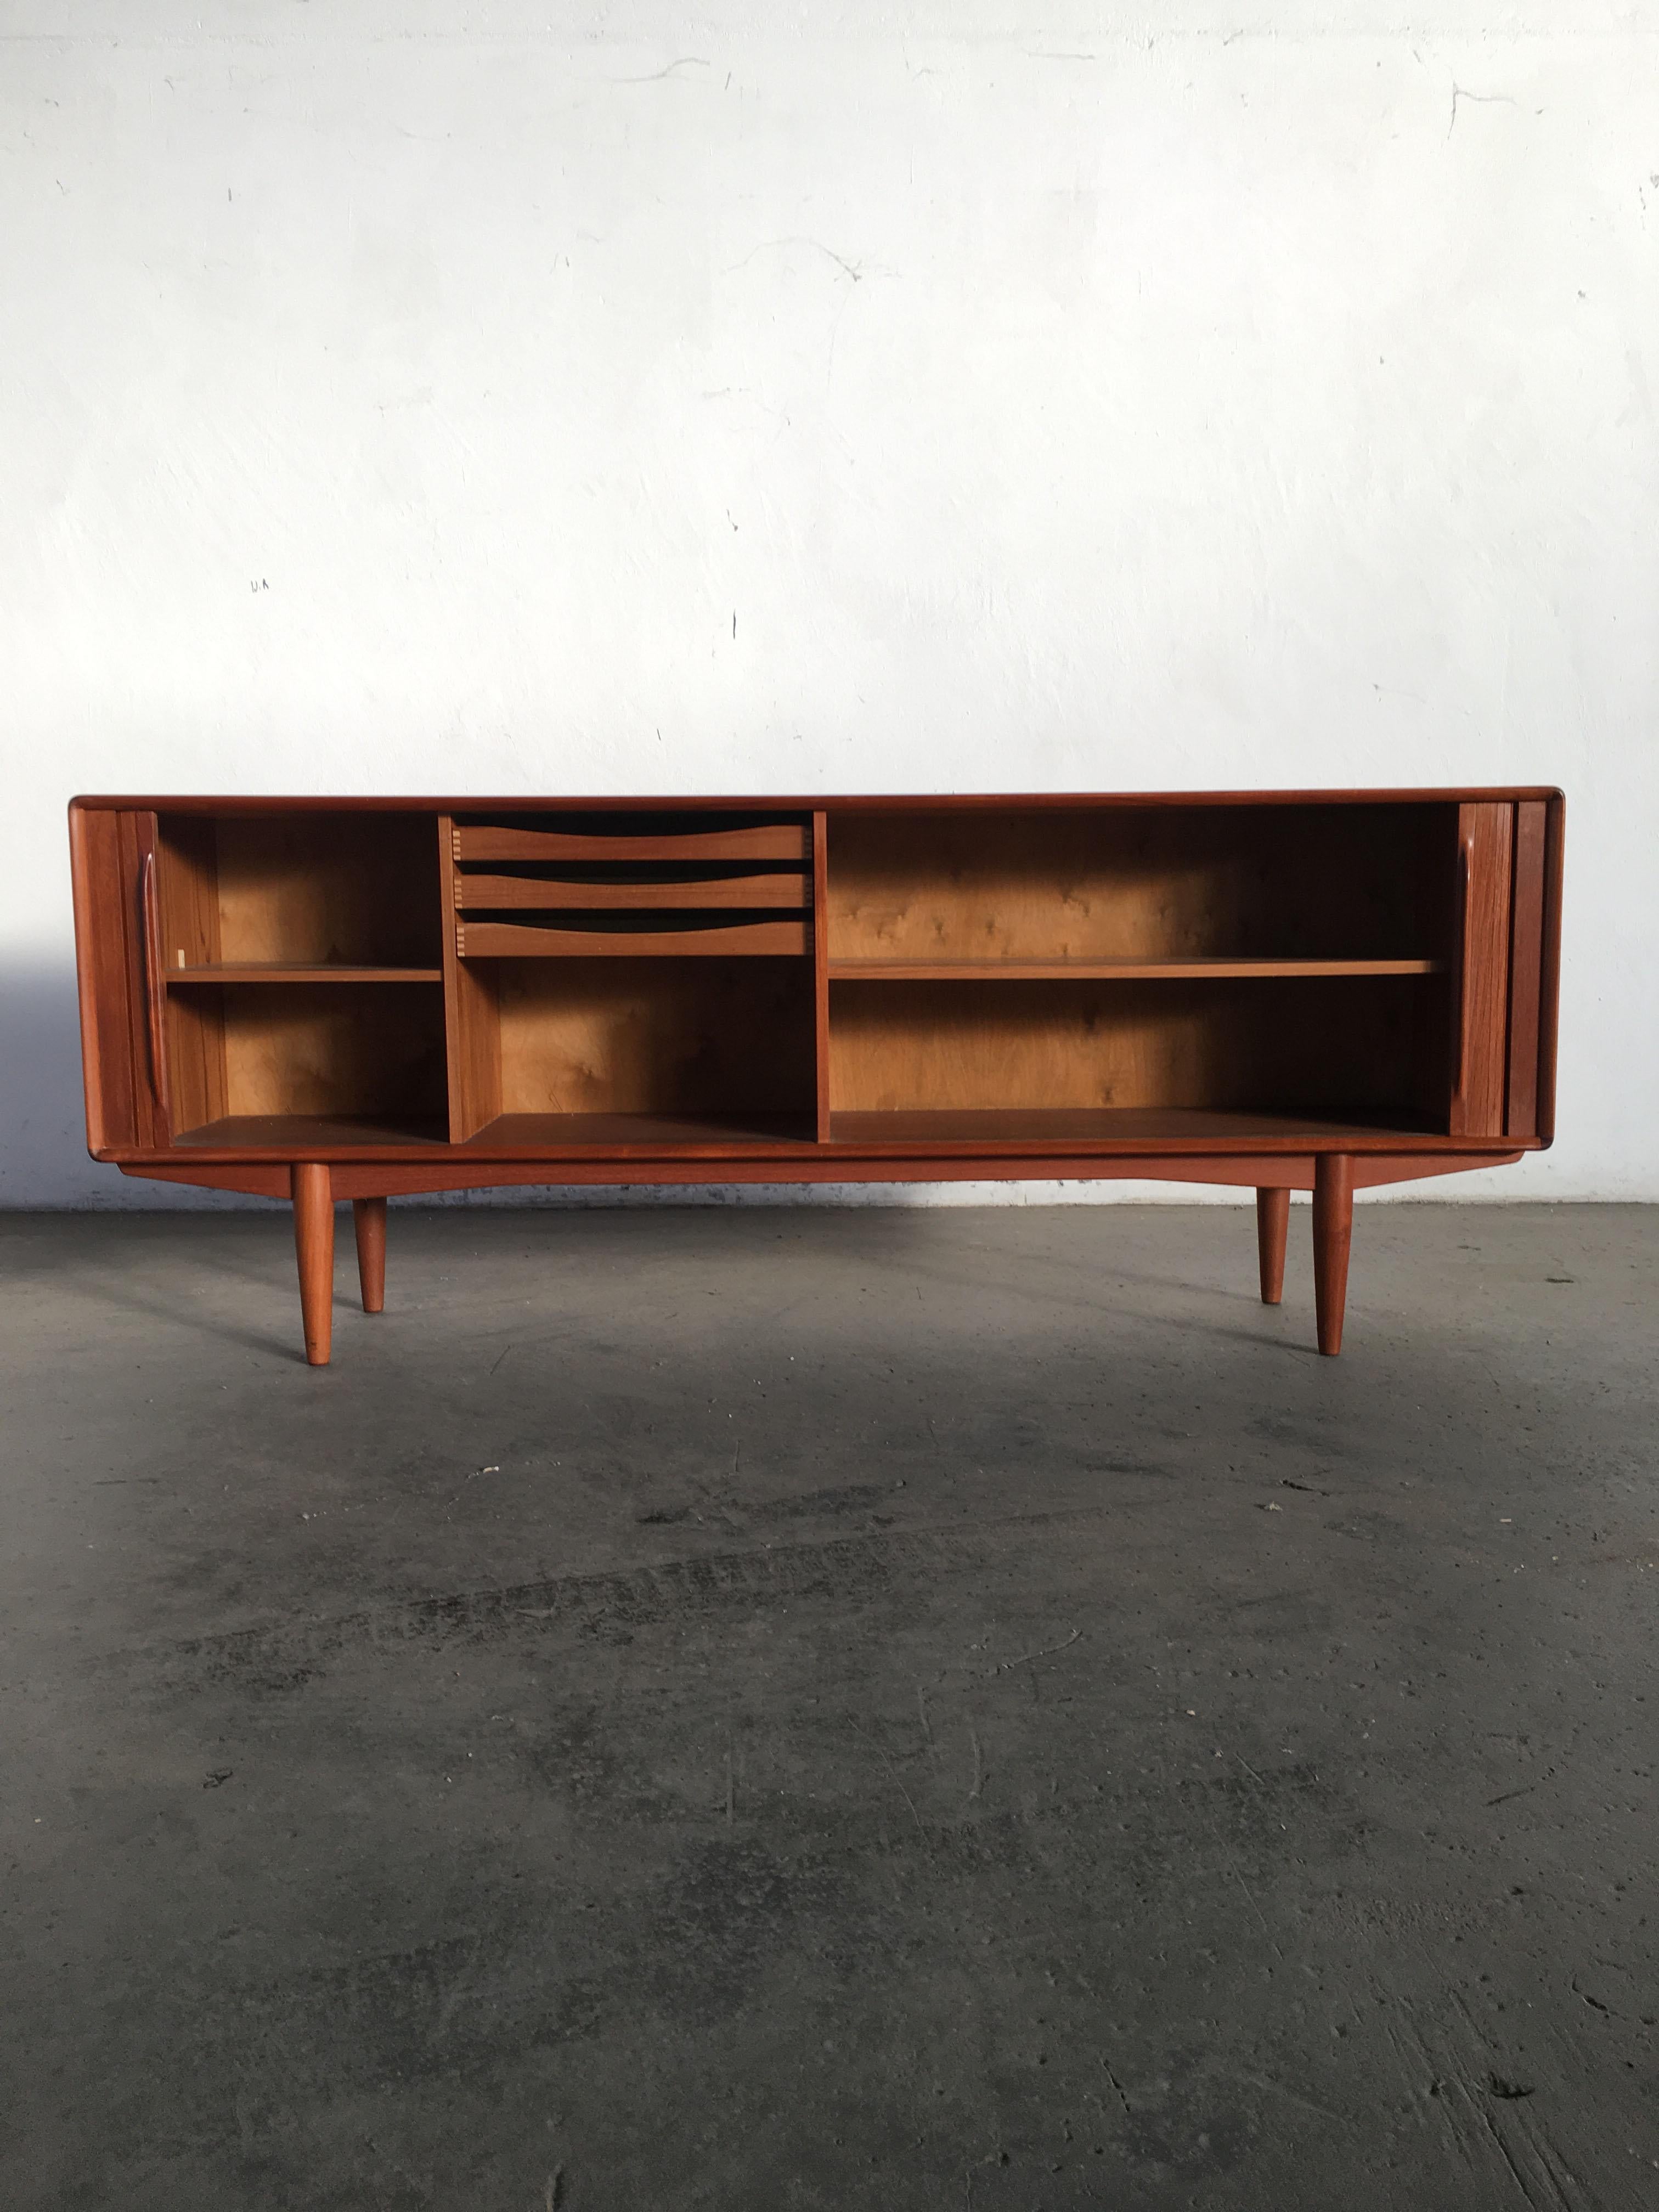 Mid-Century Modern Large Teak Credenza Sideboard by Alf Aarseth for Gustav Bahus, Norway, 1960s For Sale